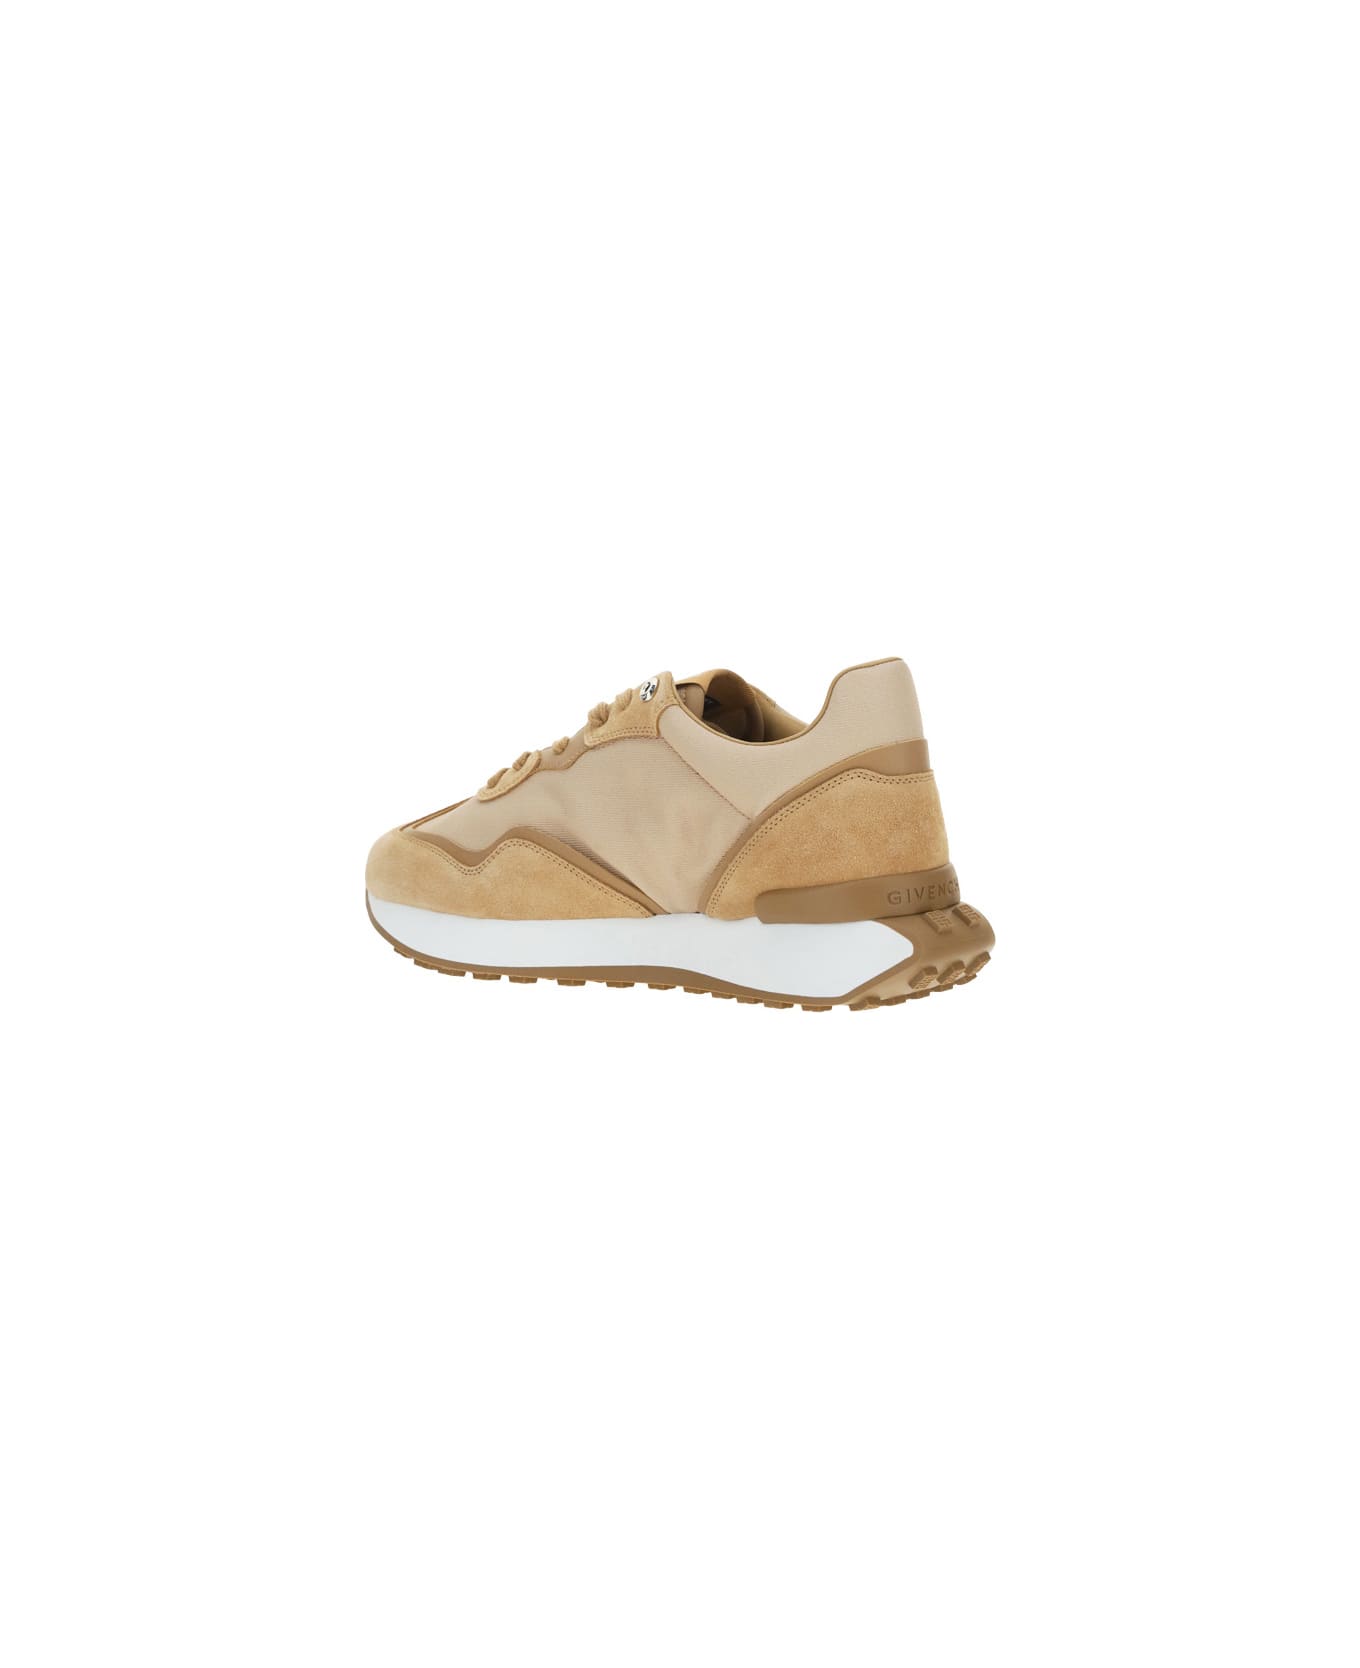 Givenchy Giv Runner Sneakers - Beige Camel